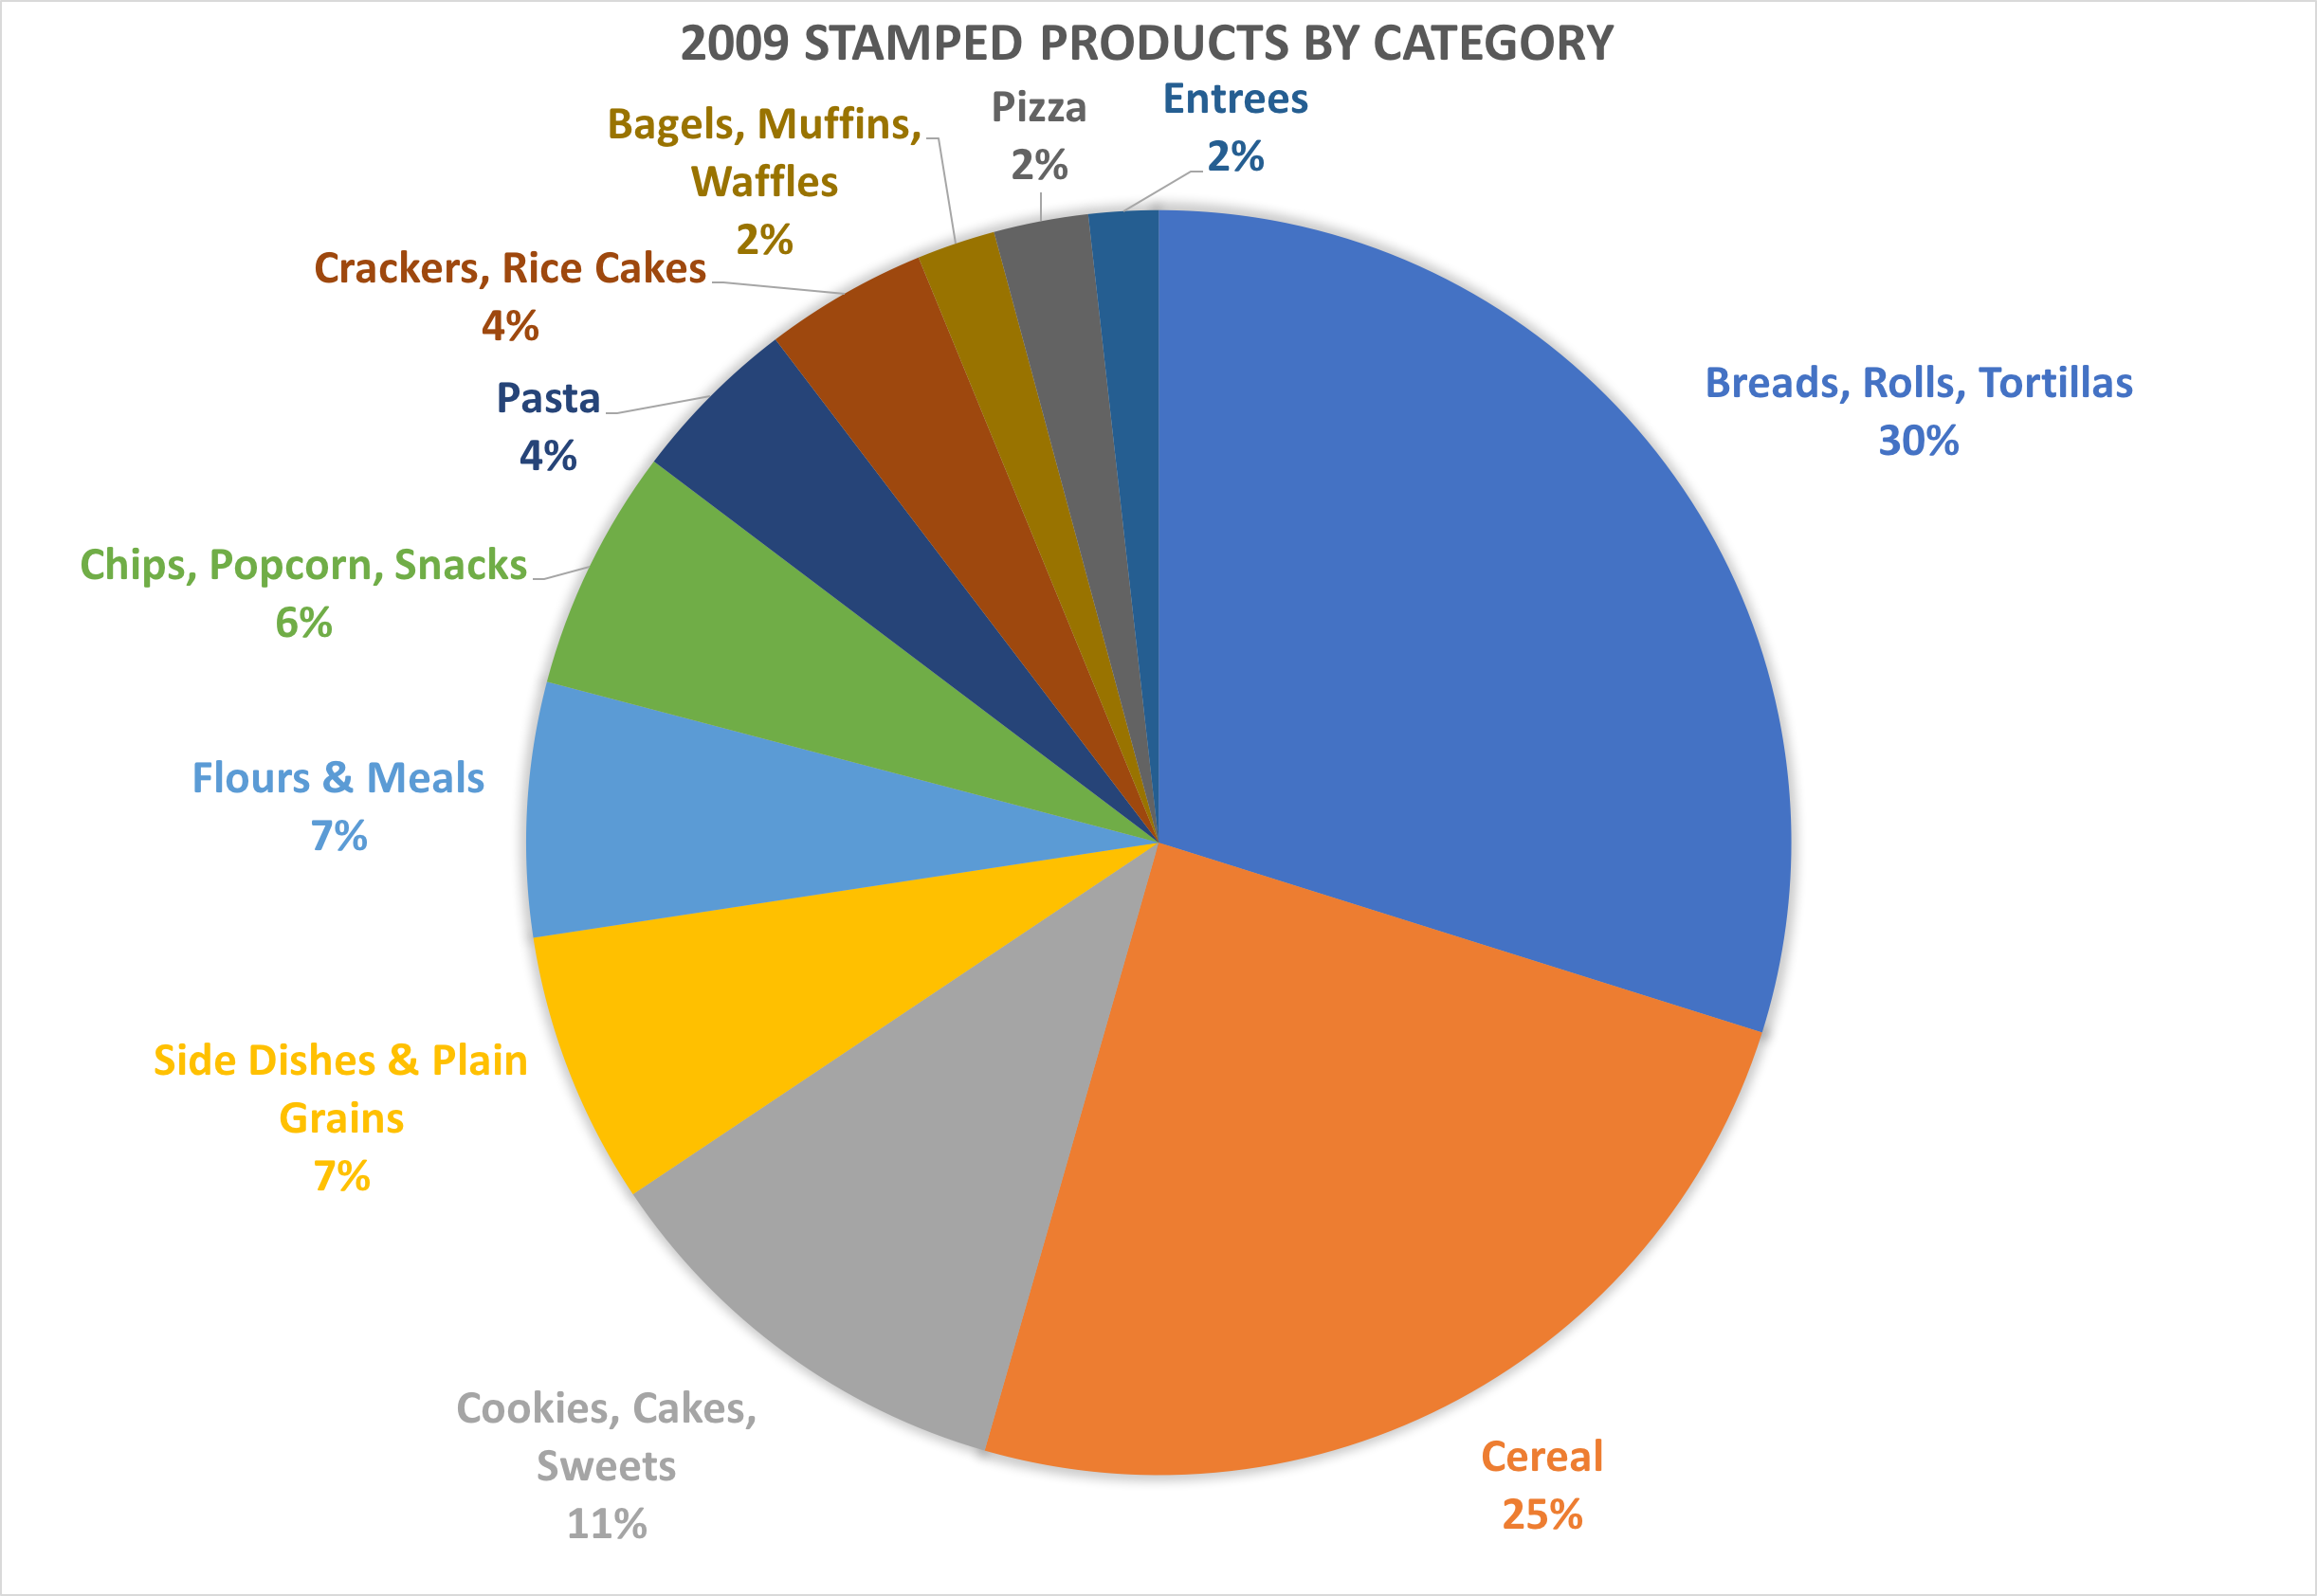 Pie chart of product categories for 2009